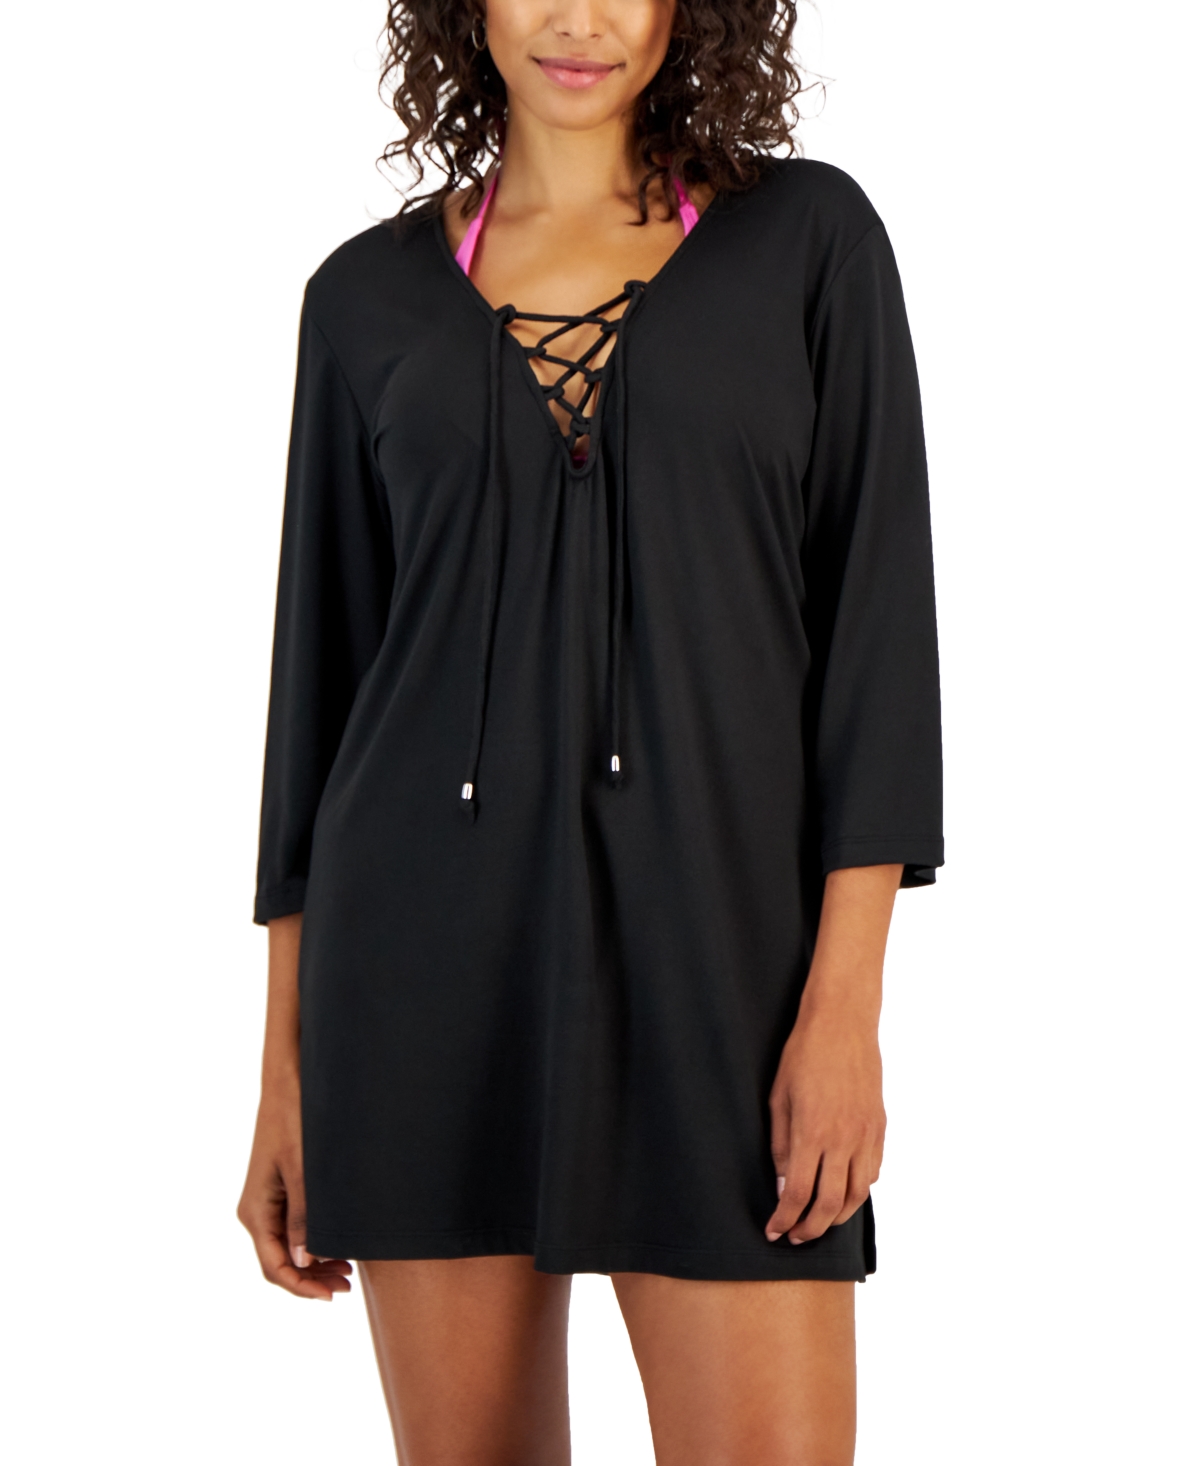 Women's Lace-Up Cover-Up Tunic Top - Black